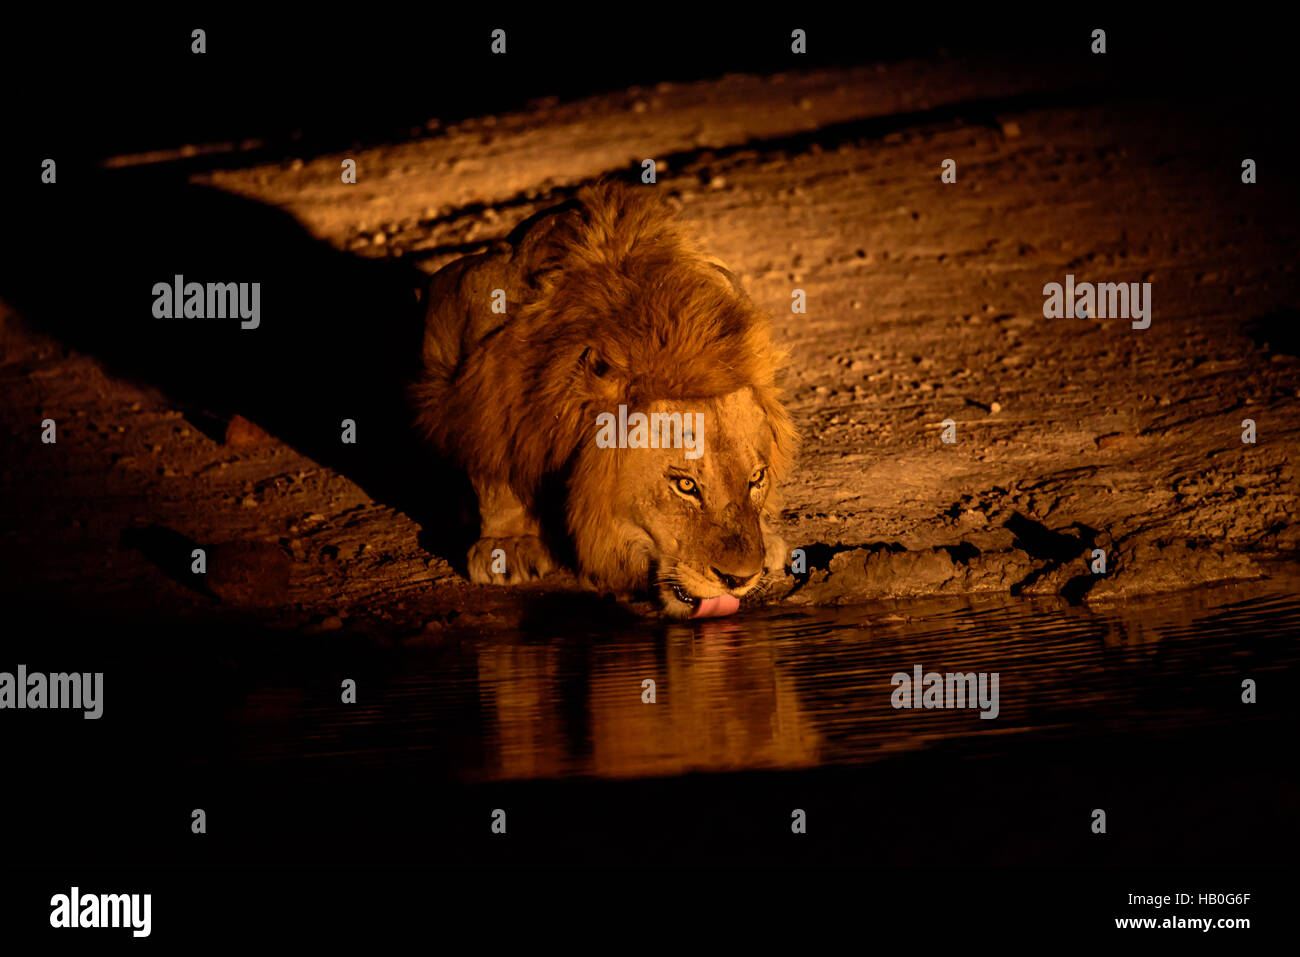 Lion drinking at the waterhole at night Stock Photo